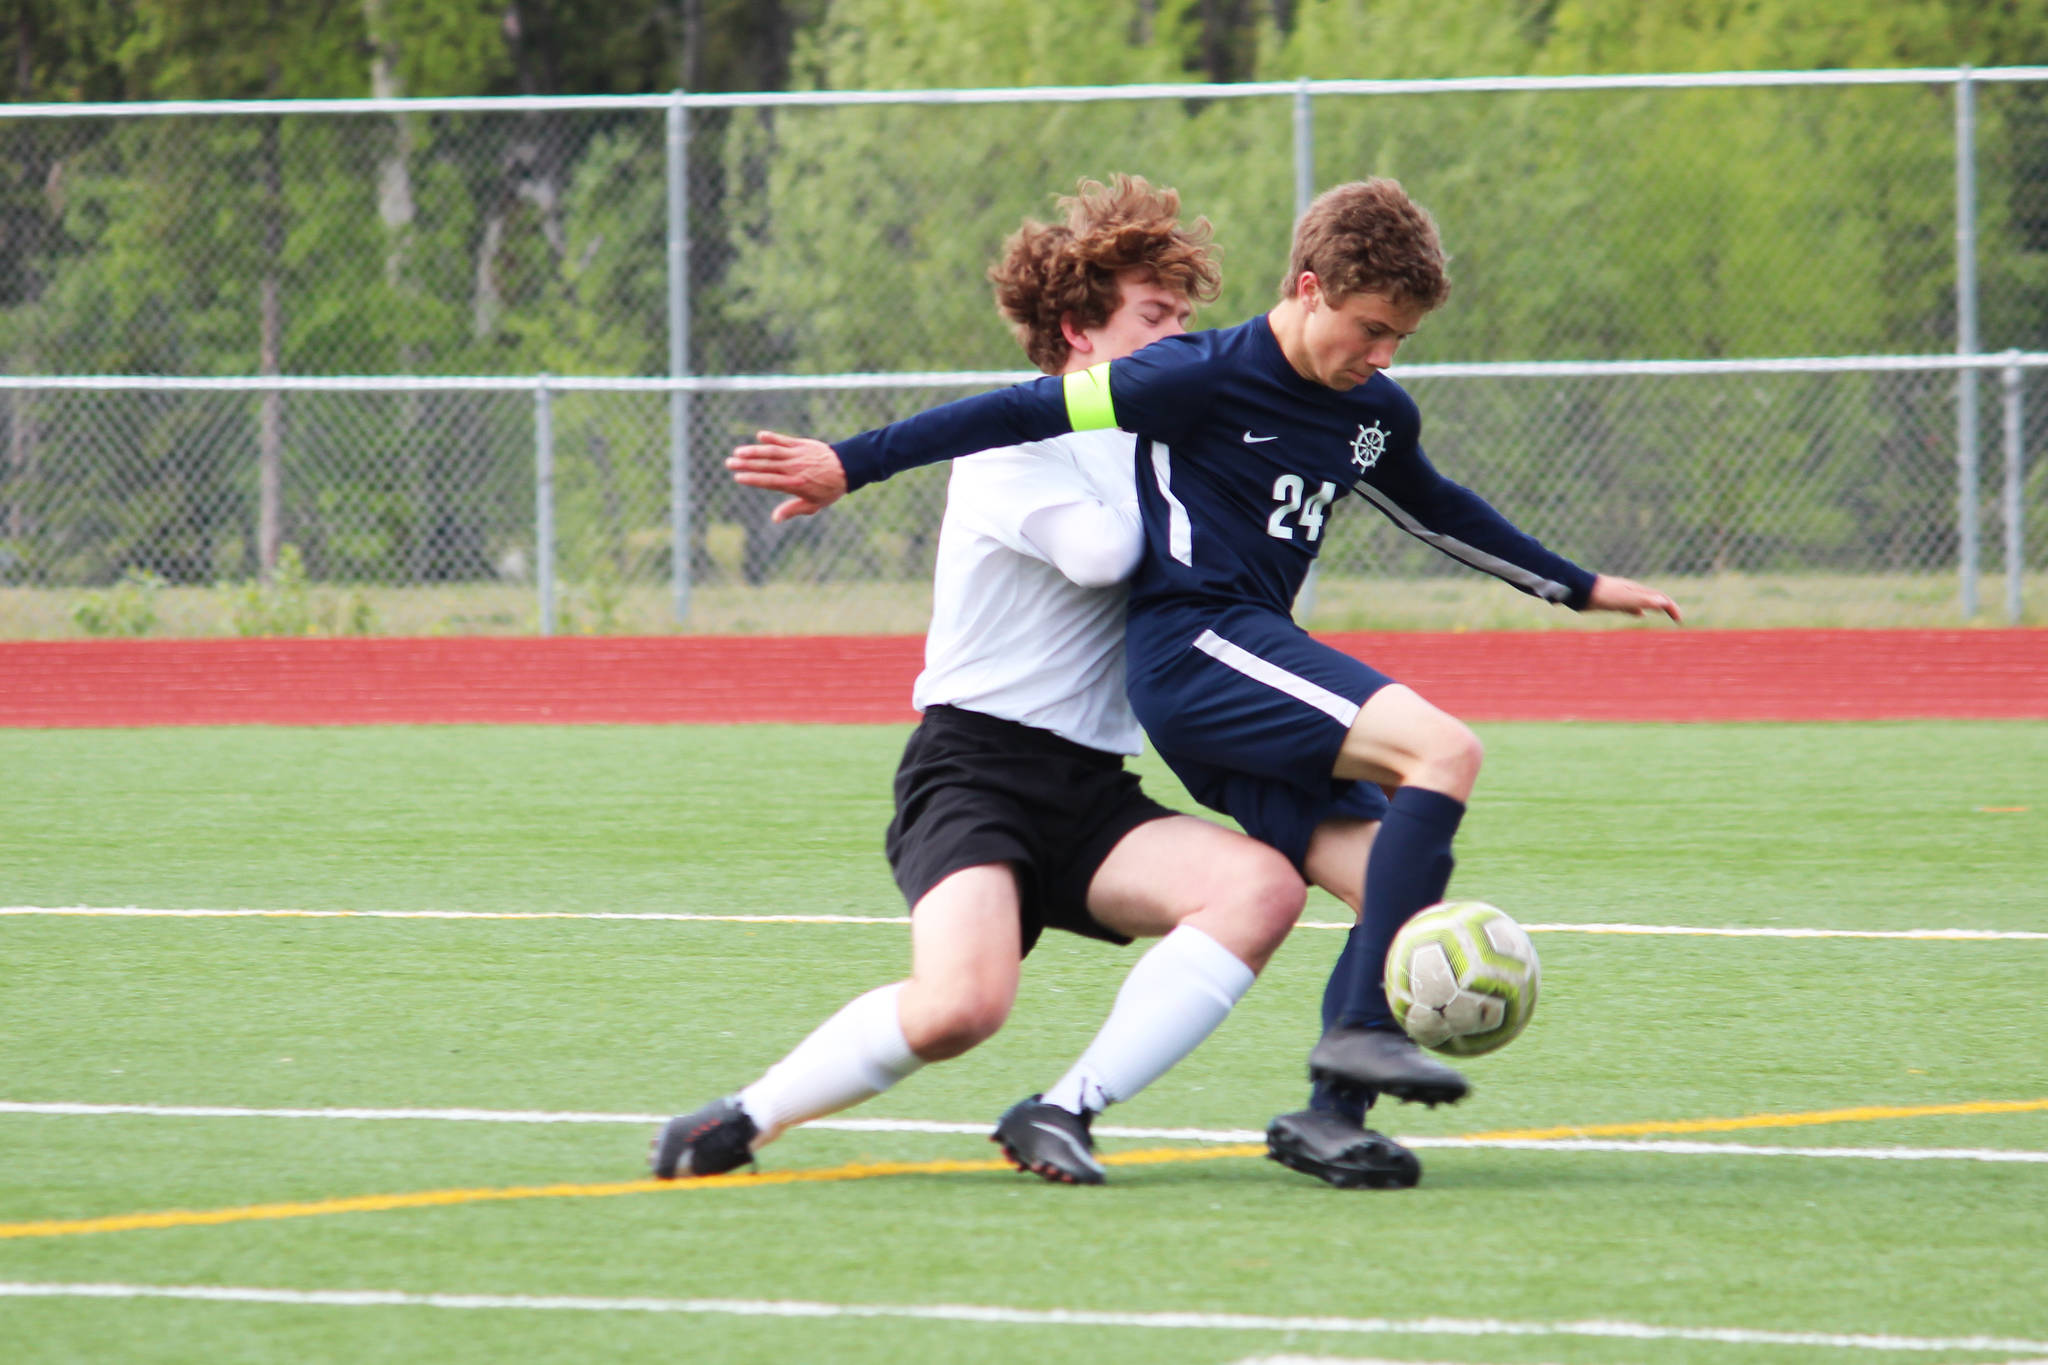 Homer’s Austin Shafford battles to control the ball while under pressure from Grace Christian’s Jackson Tanner during a Friday, May 24, 2019 game in the Division II state soccer championship tournament at Eagle River High School in Eagle River, Alaska. (Photo by Megan Pacer/Homer News)